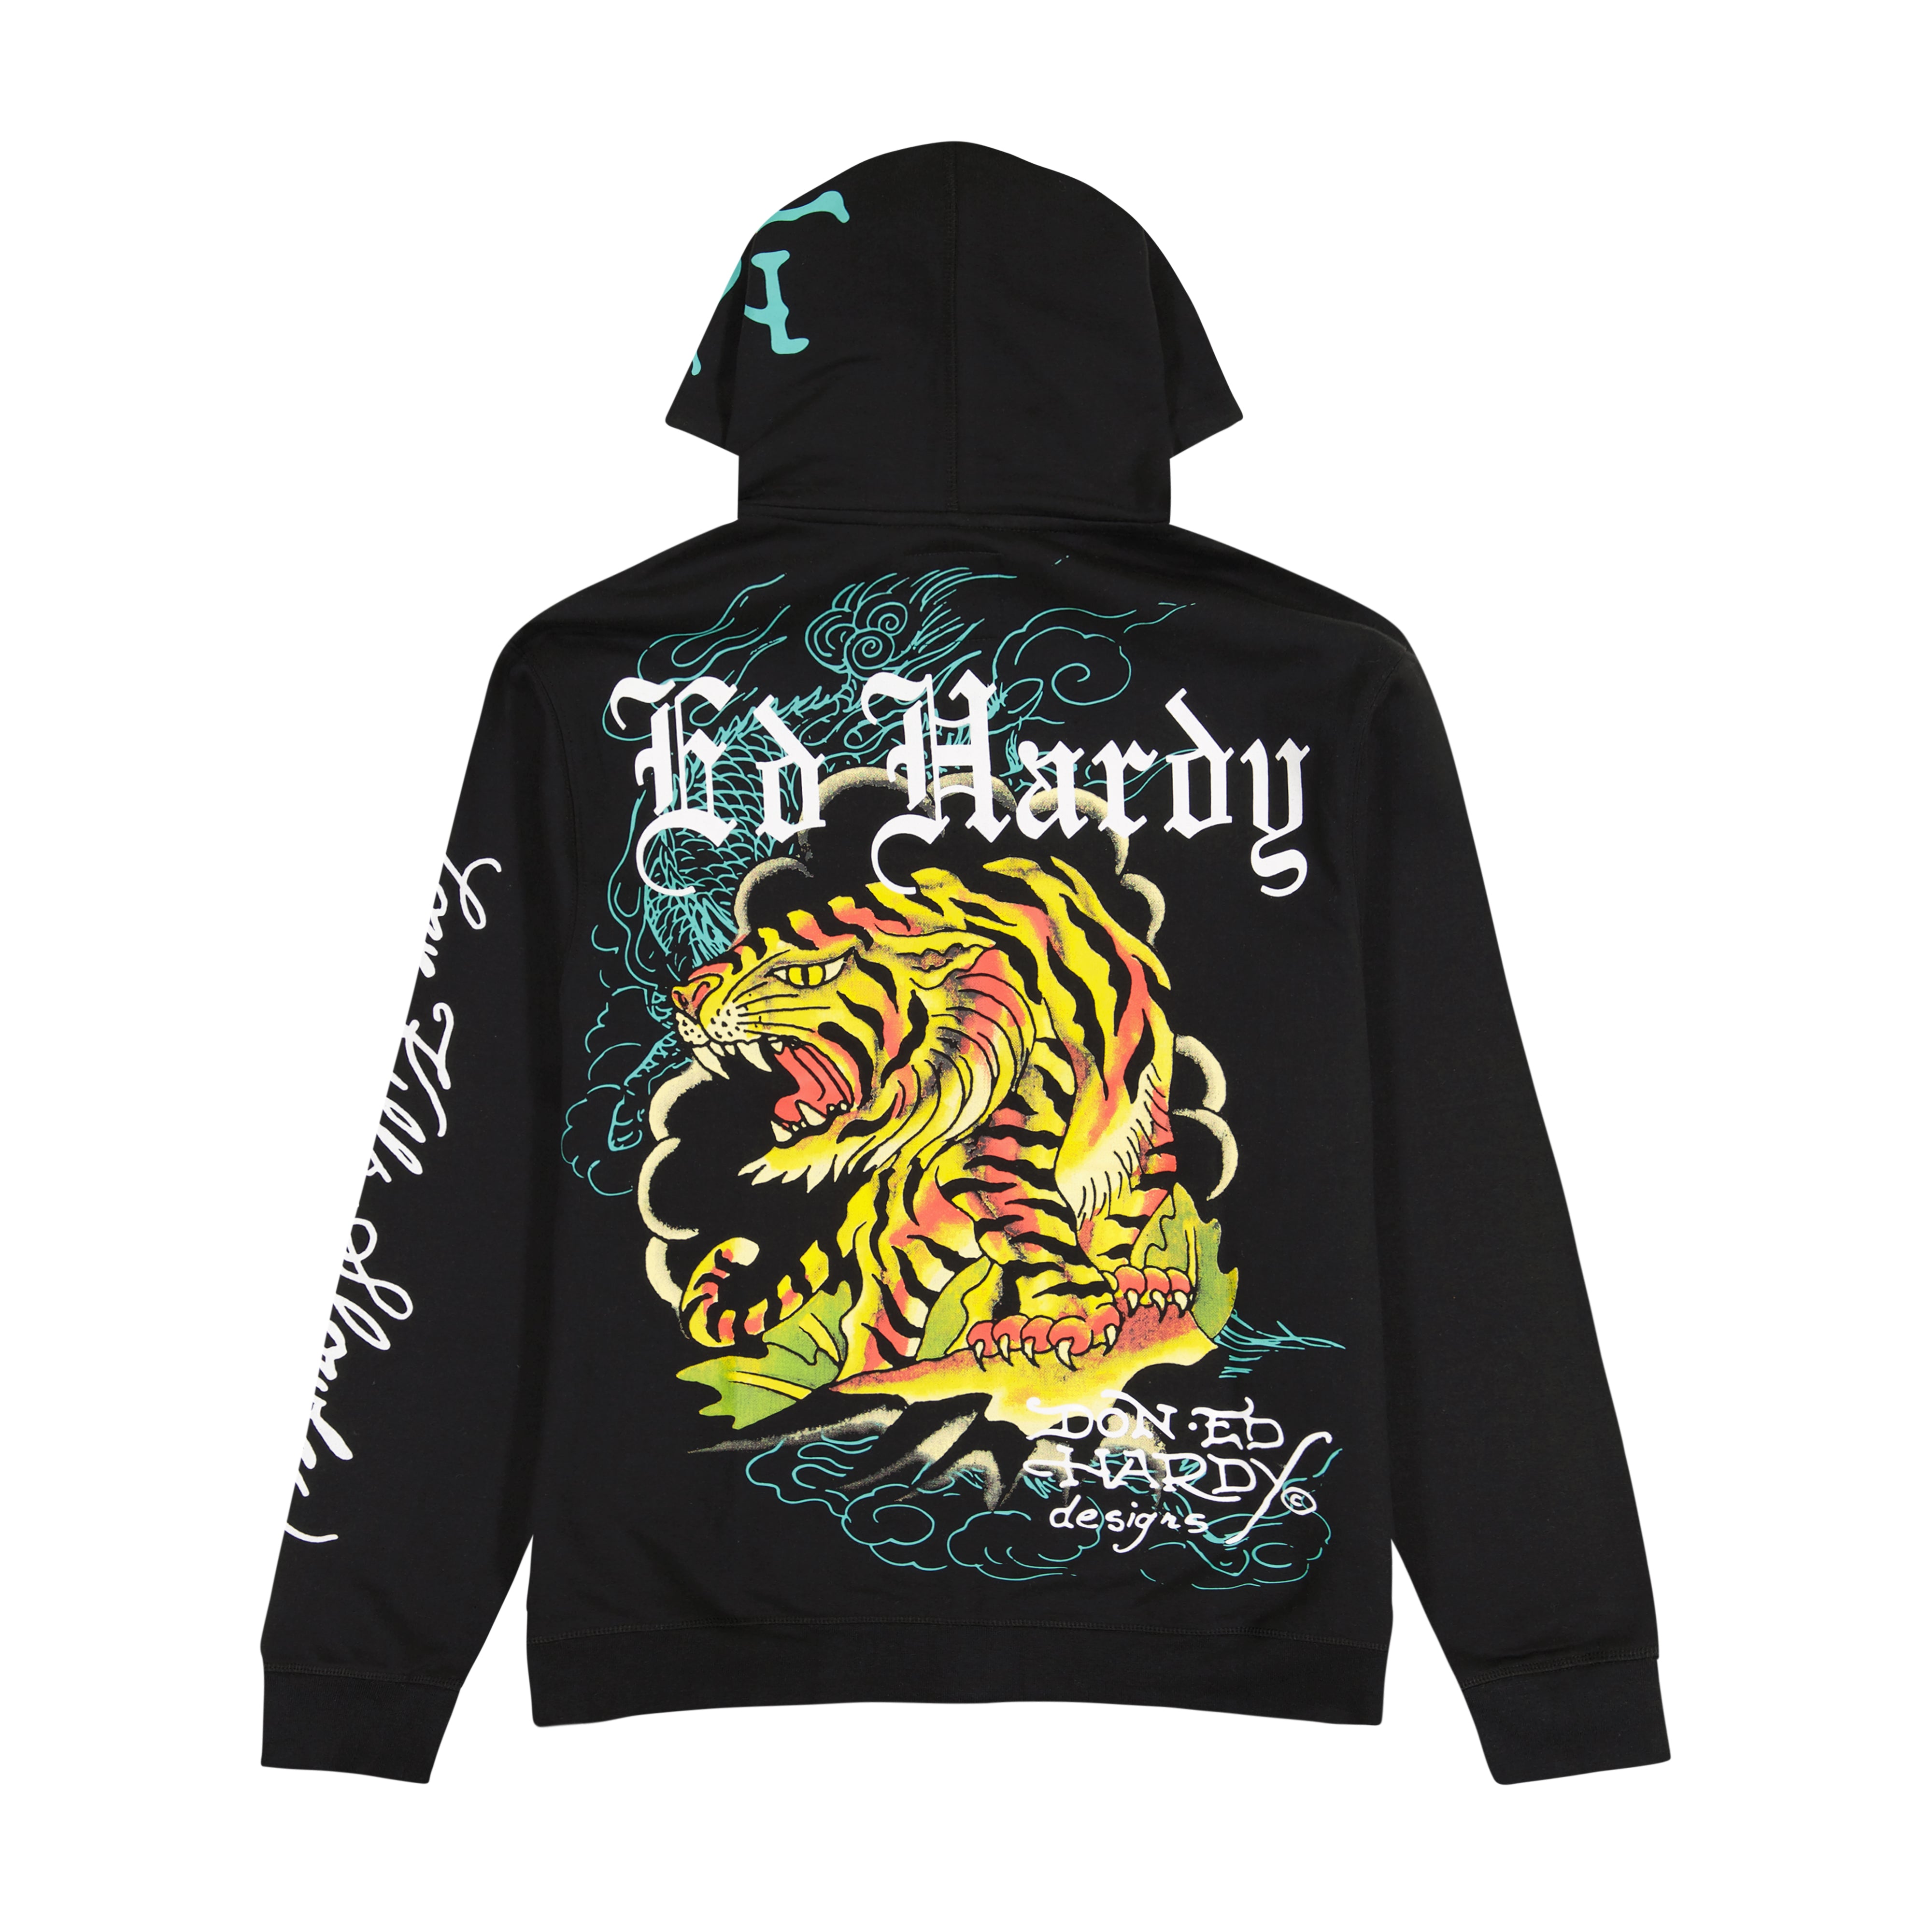 Ed Hardy's long road to redemption